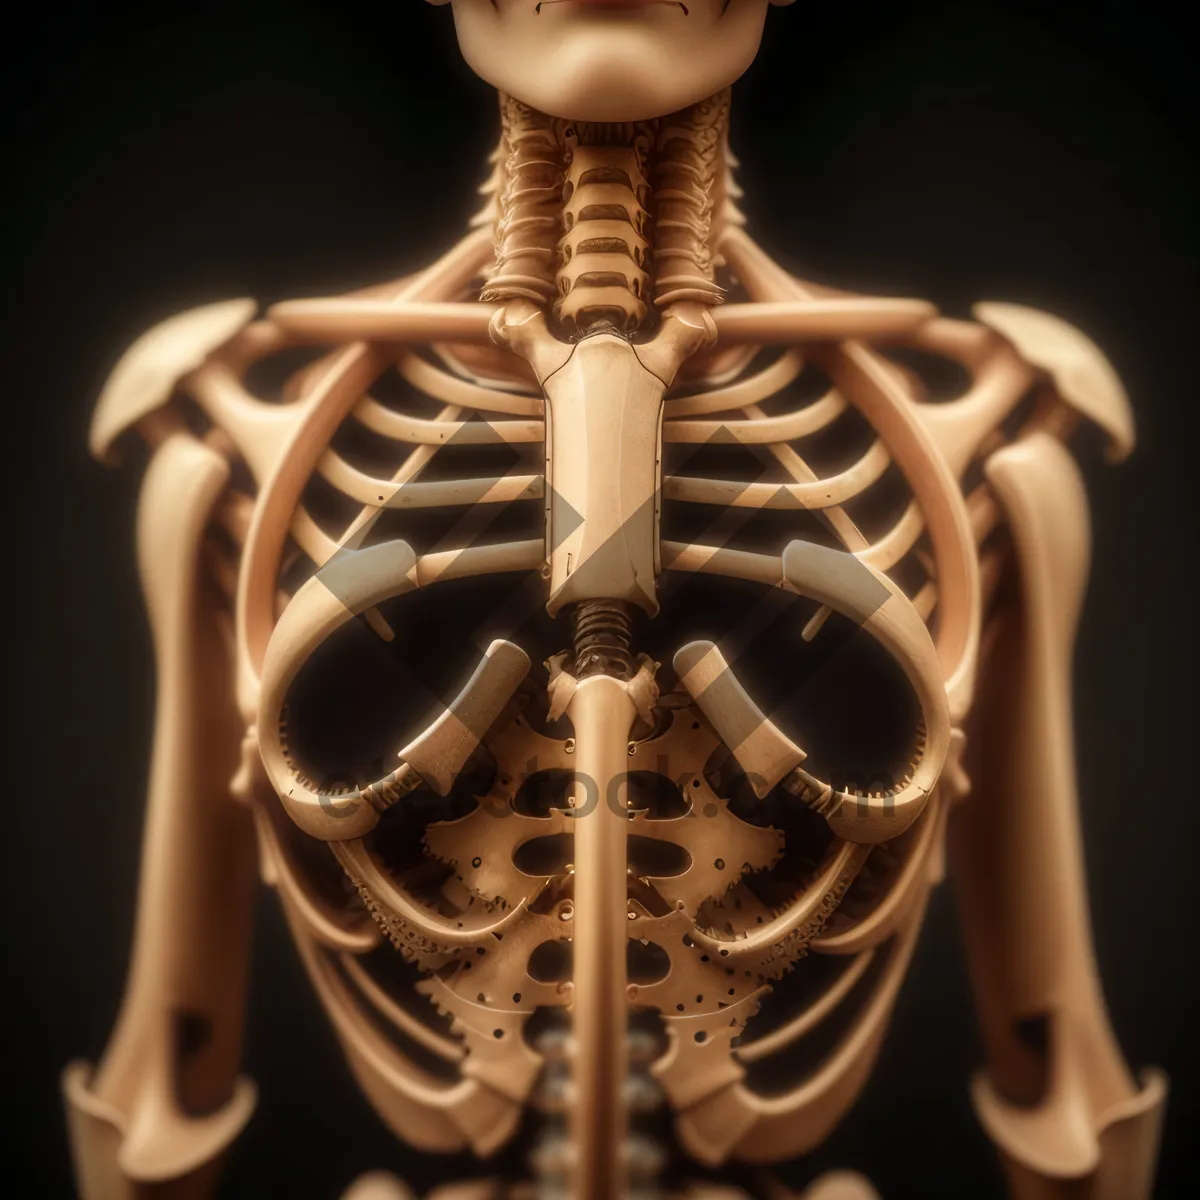 Picture of Anatomical Human Skeleton - Medical Science X-Ray